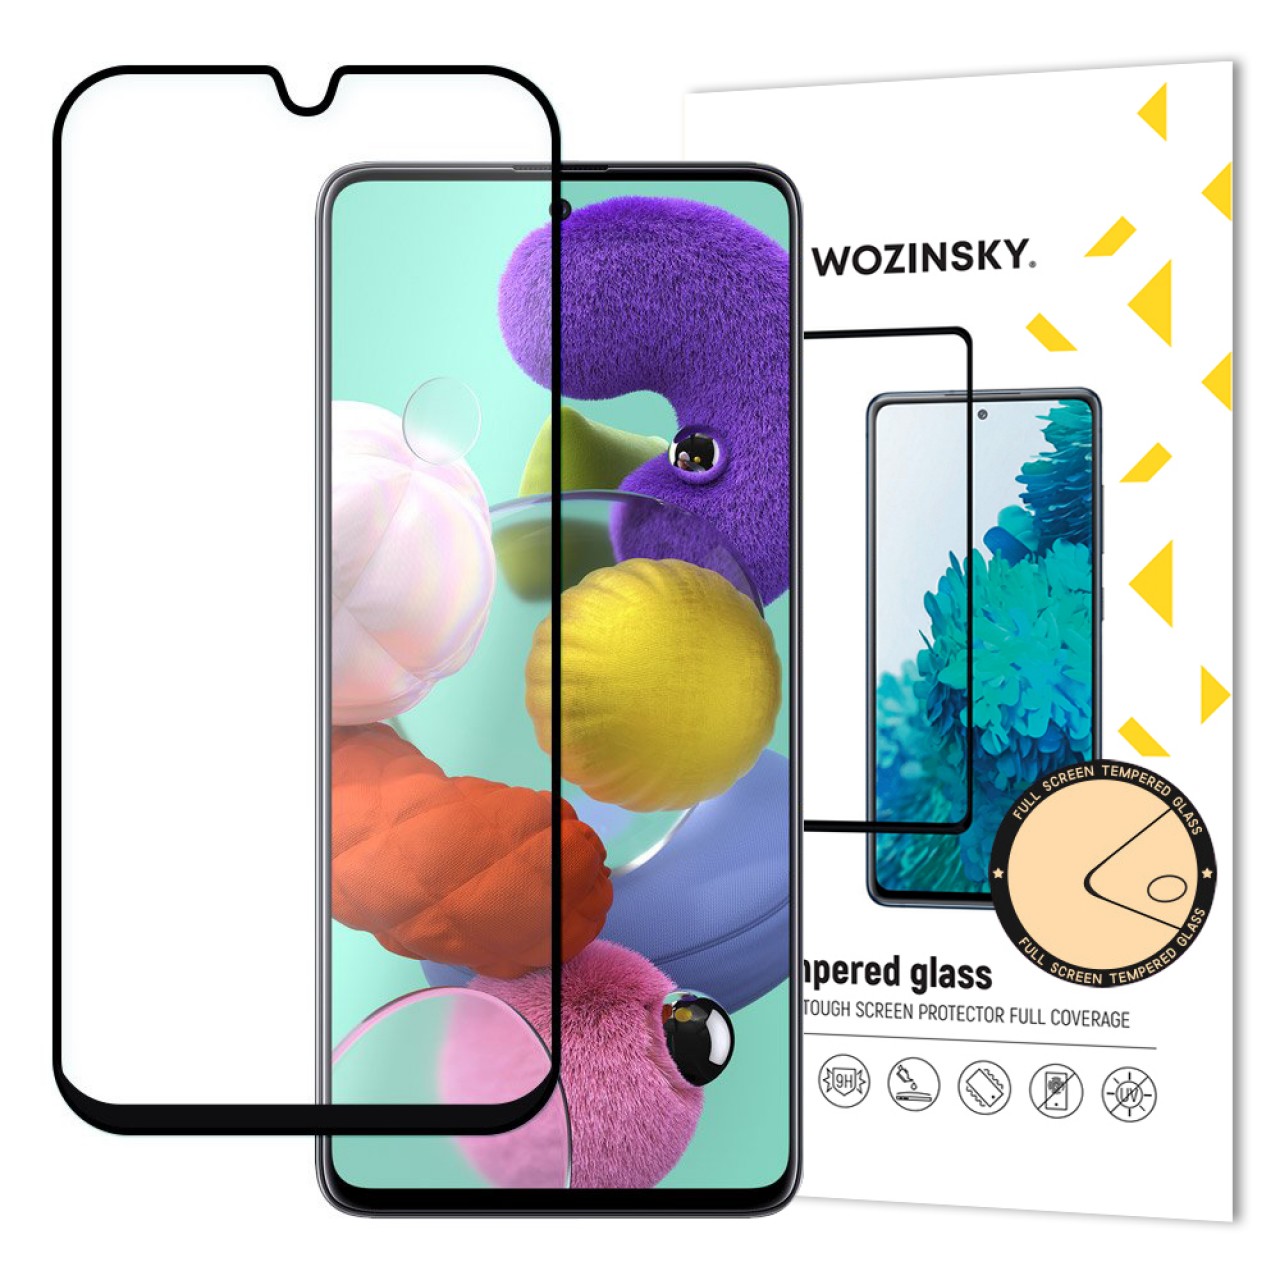 Tempered Glass (Τζάμι) - Προστασία Οθόνης 9D Samsung Galaxy A71 Full Glue Super Tough Screen Protector Full Coveraged with Frame Case Friendly - Μαύρο - 5934 - Wozinsky